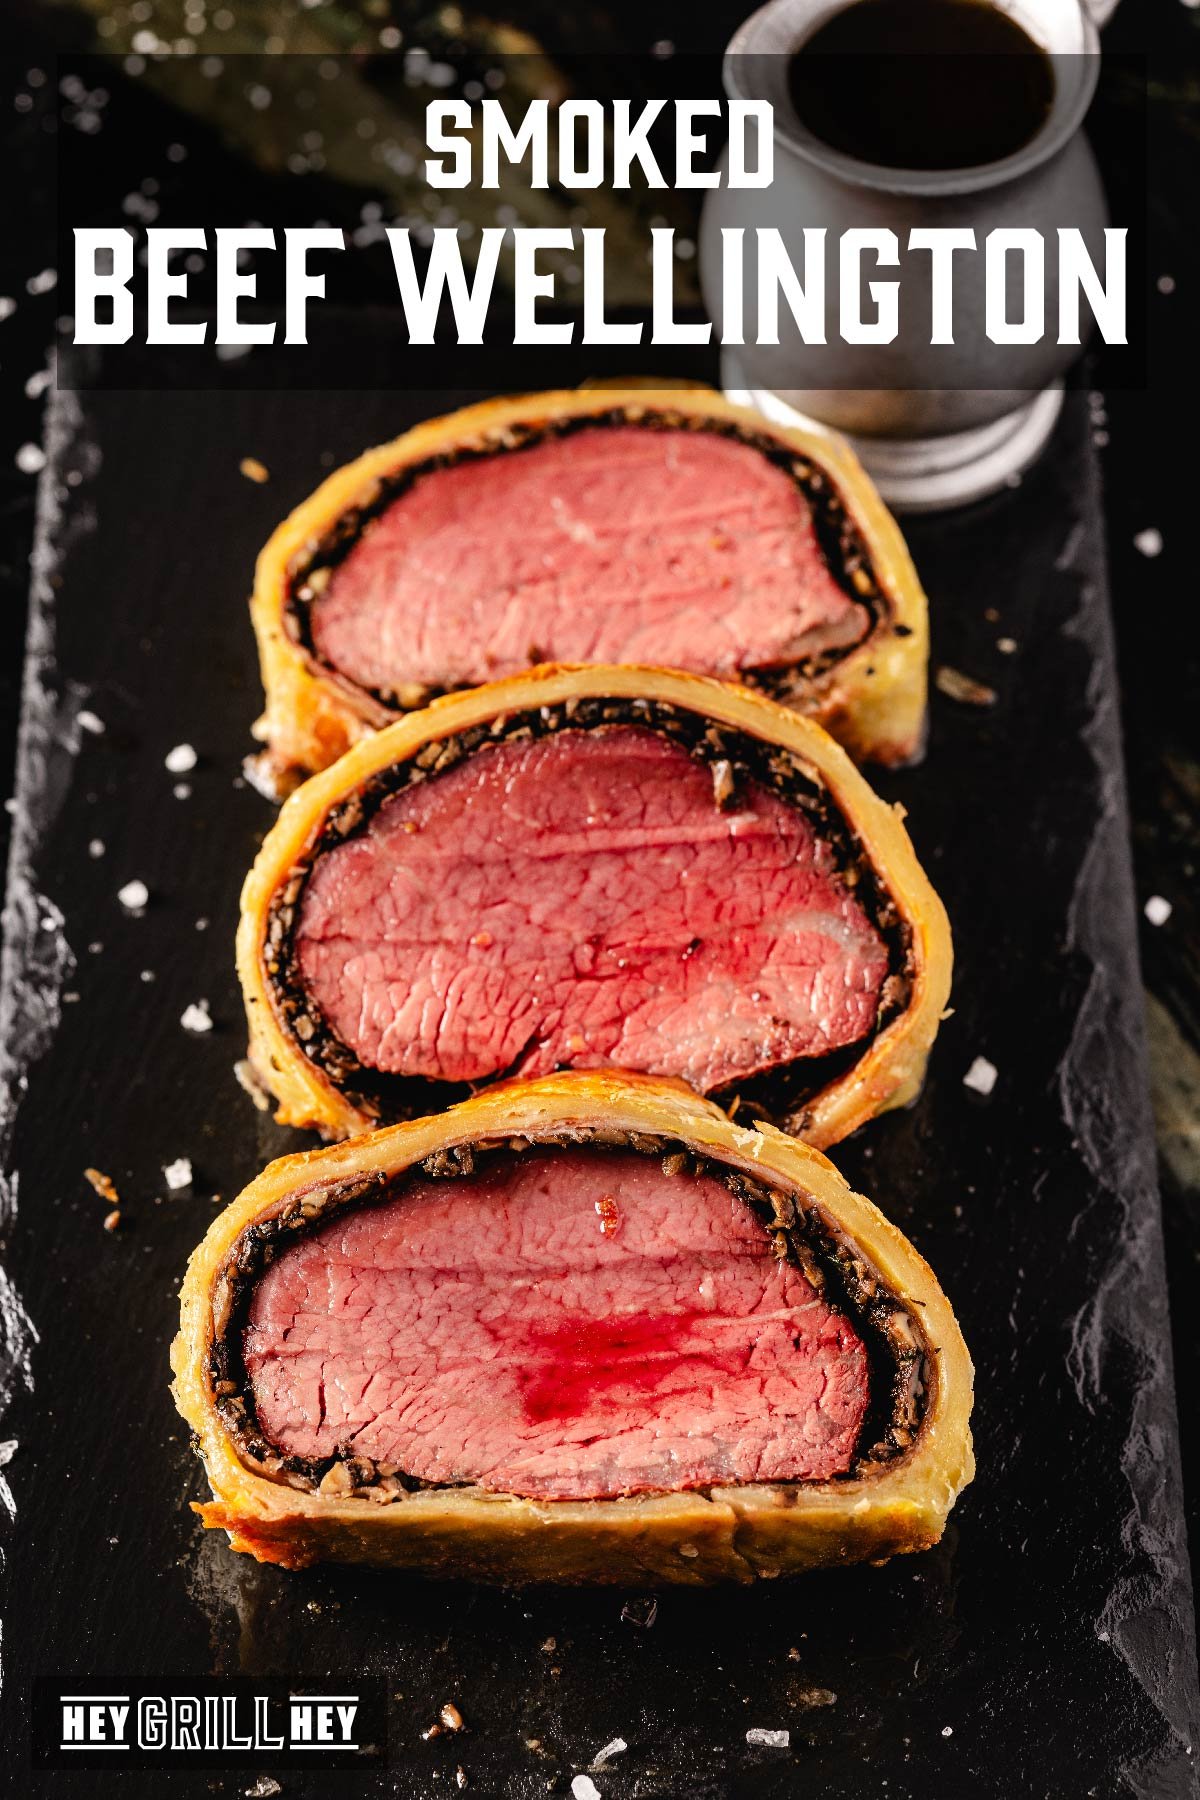 Sliced Beef Wellington on a black serving platter. Text reads "Smoked Beef Wellington".